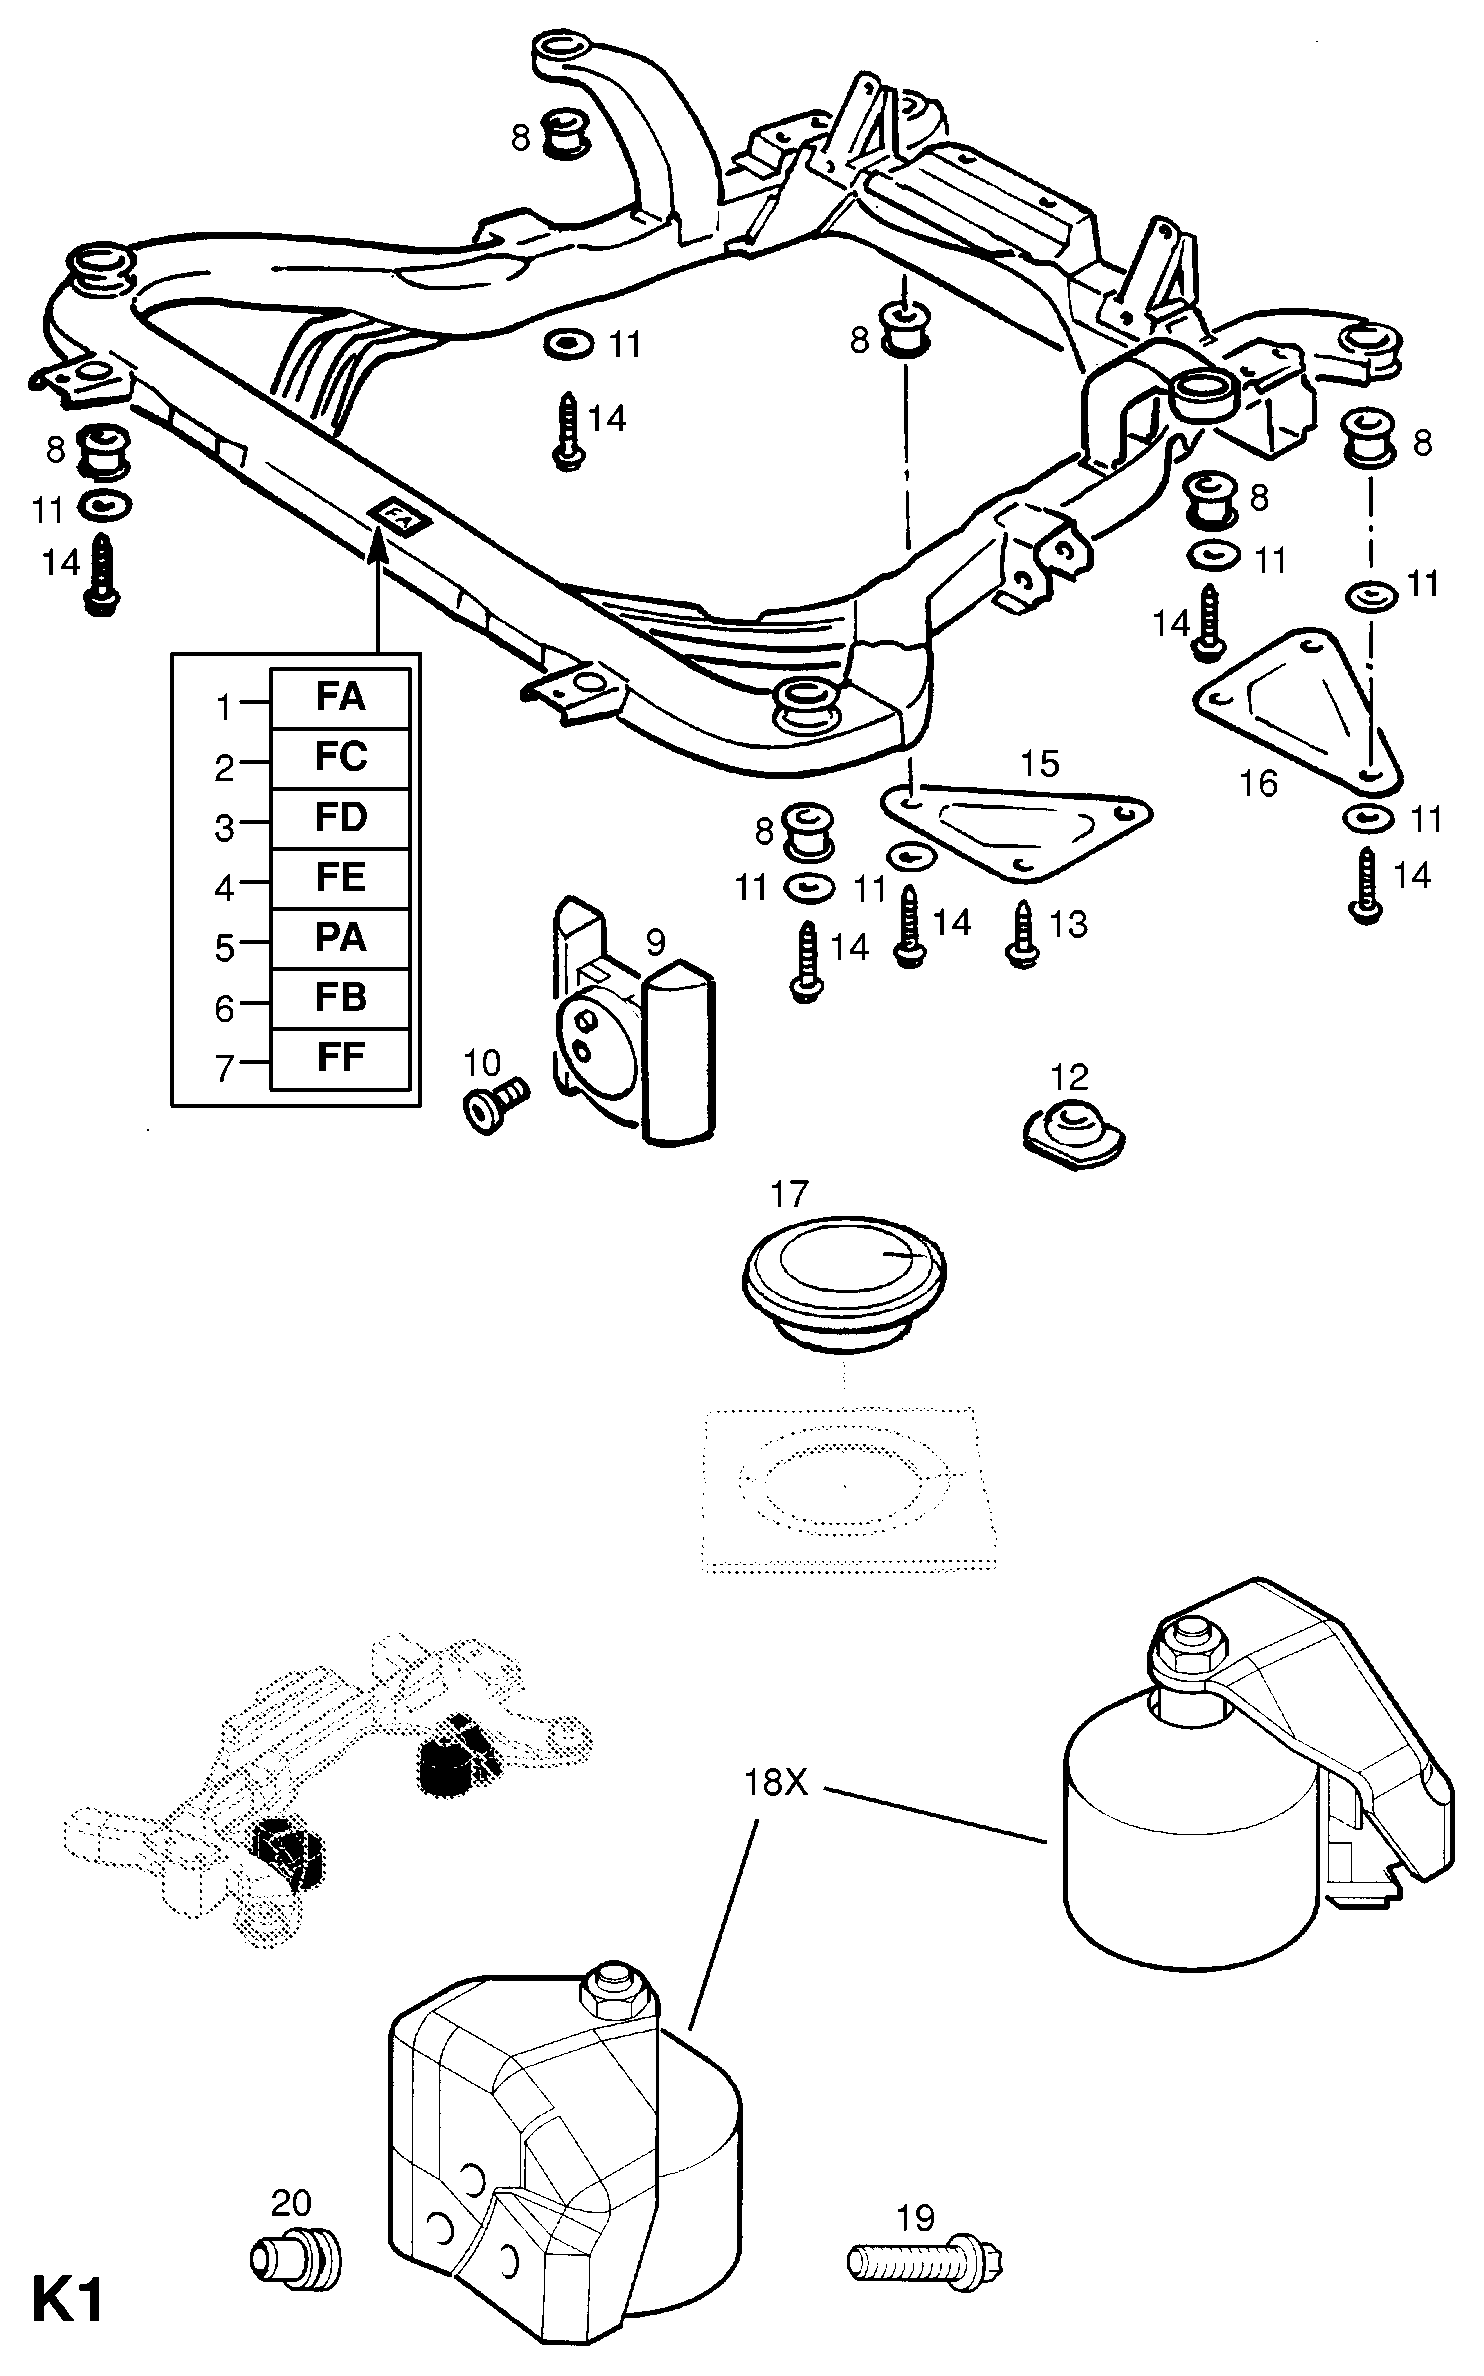 OPEL 302015 - CROSSMEMBER, ASSY., FRONT AXLE, WITH BUSHES (IDENT FC) (EXCEPT V autodraugiem.lv